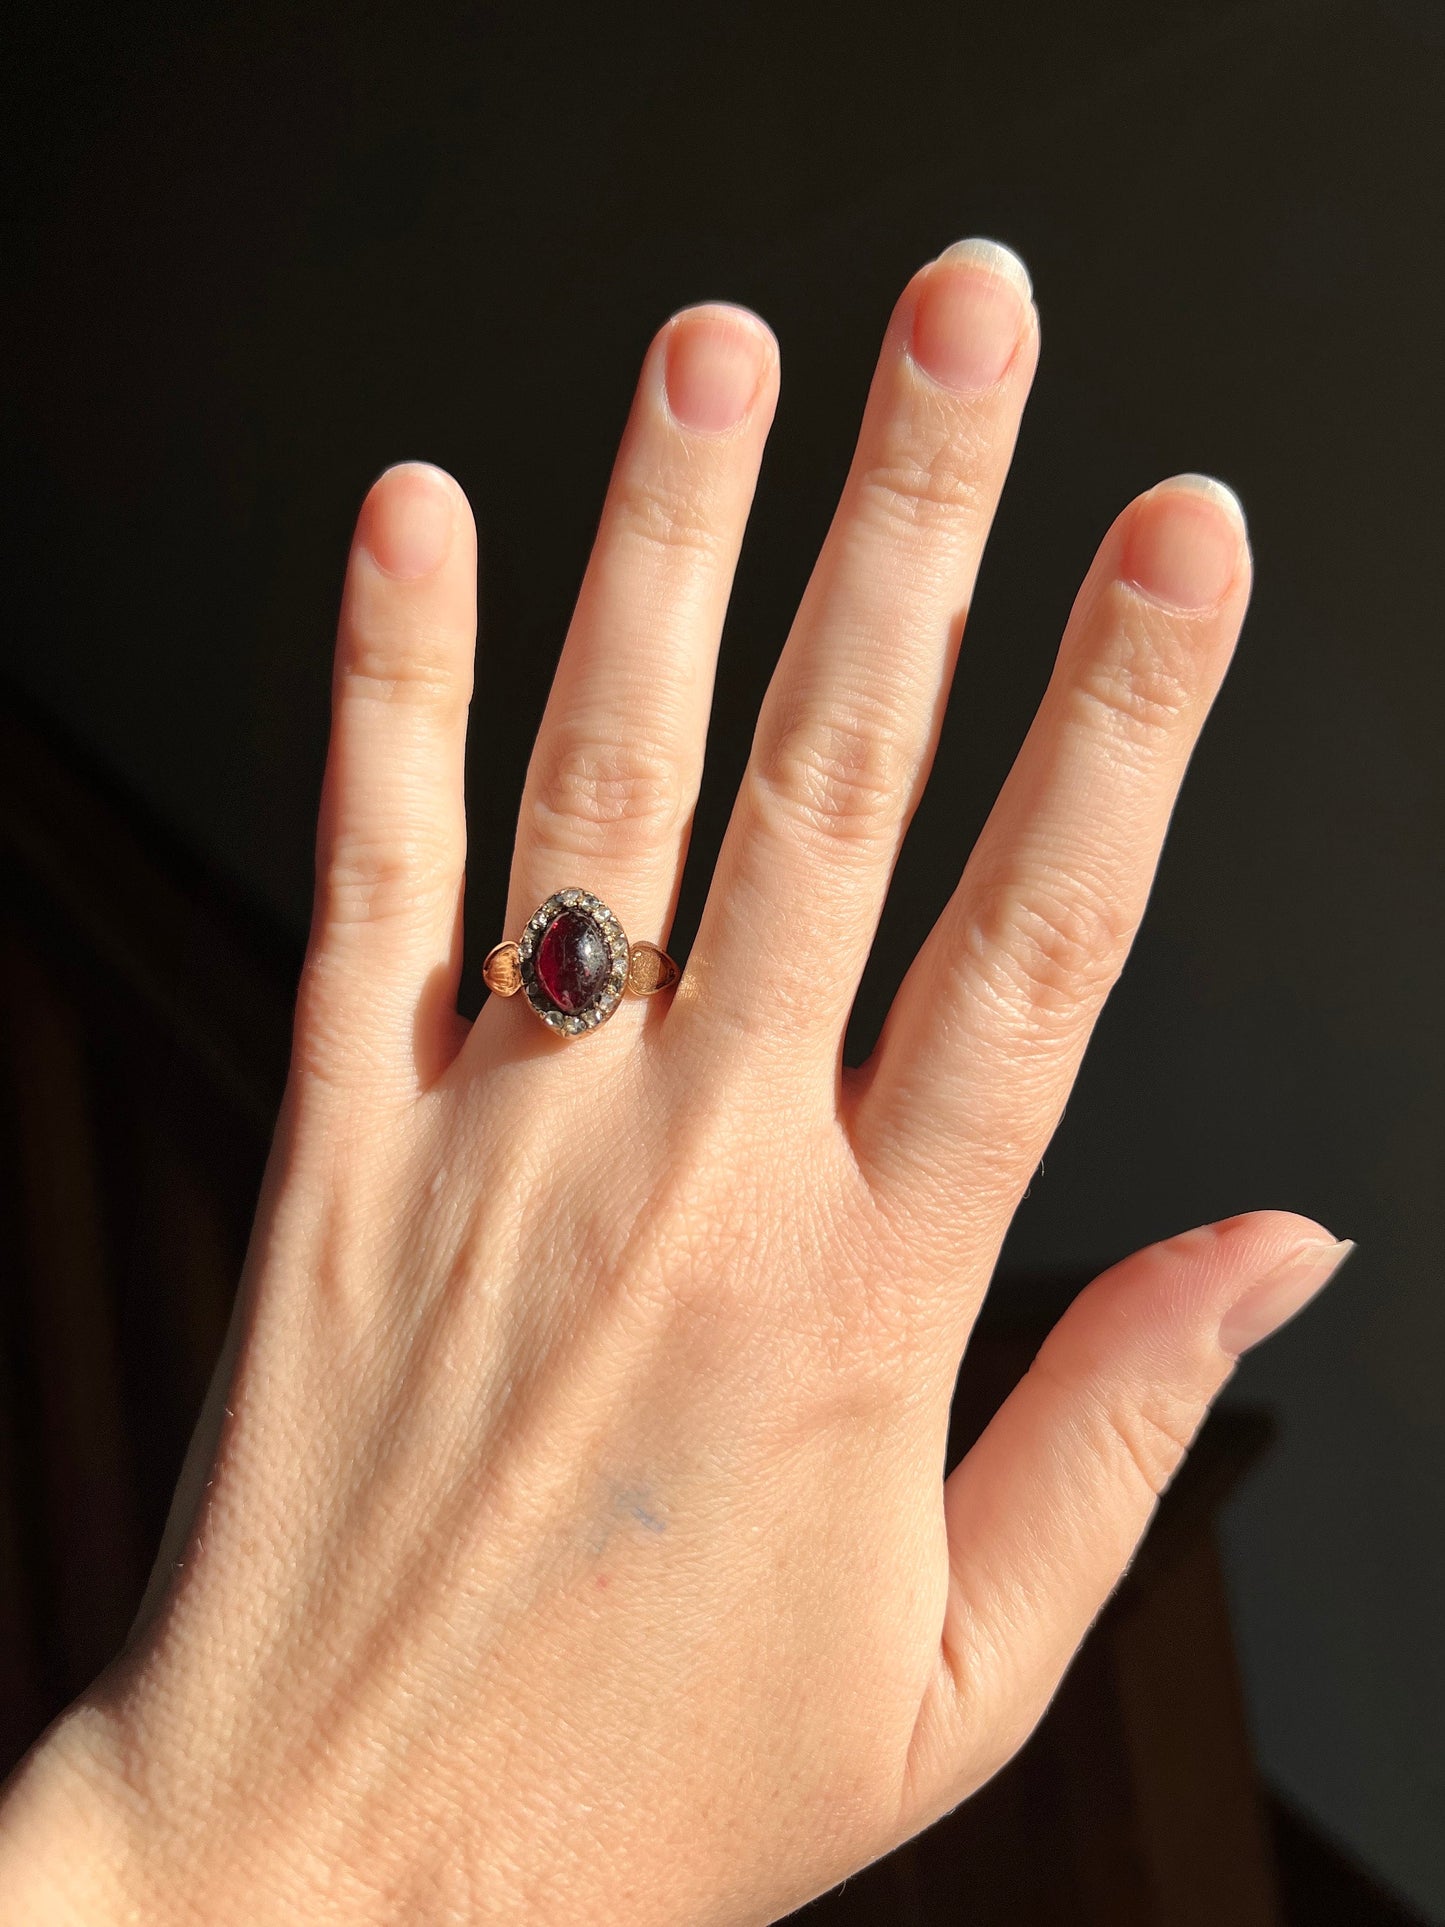 Glowing Cabochon Red GARNET Rose Cut Diamond Halo Ring French Antique 14k Gold Georgian Victorian Juicy Oval Berry Red Pink Romantic Gift